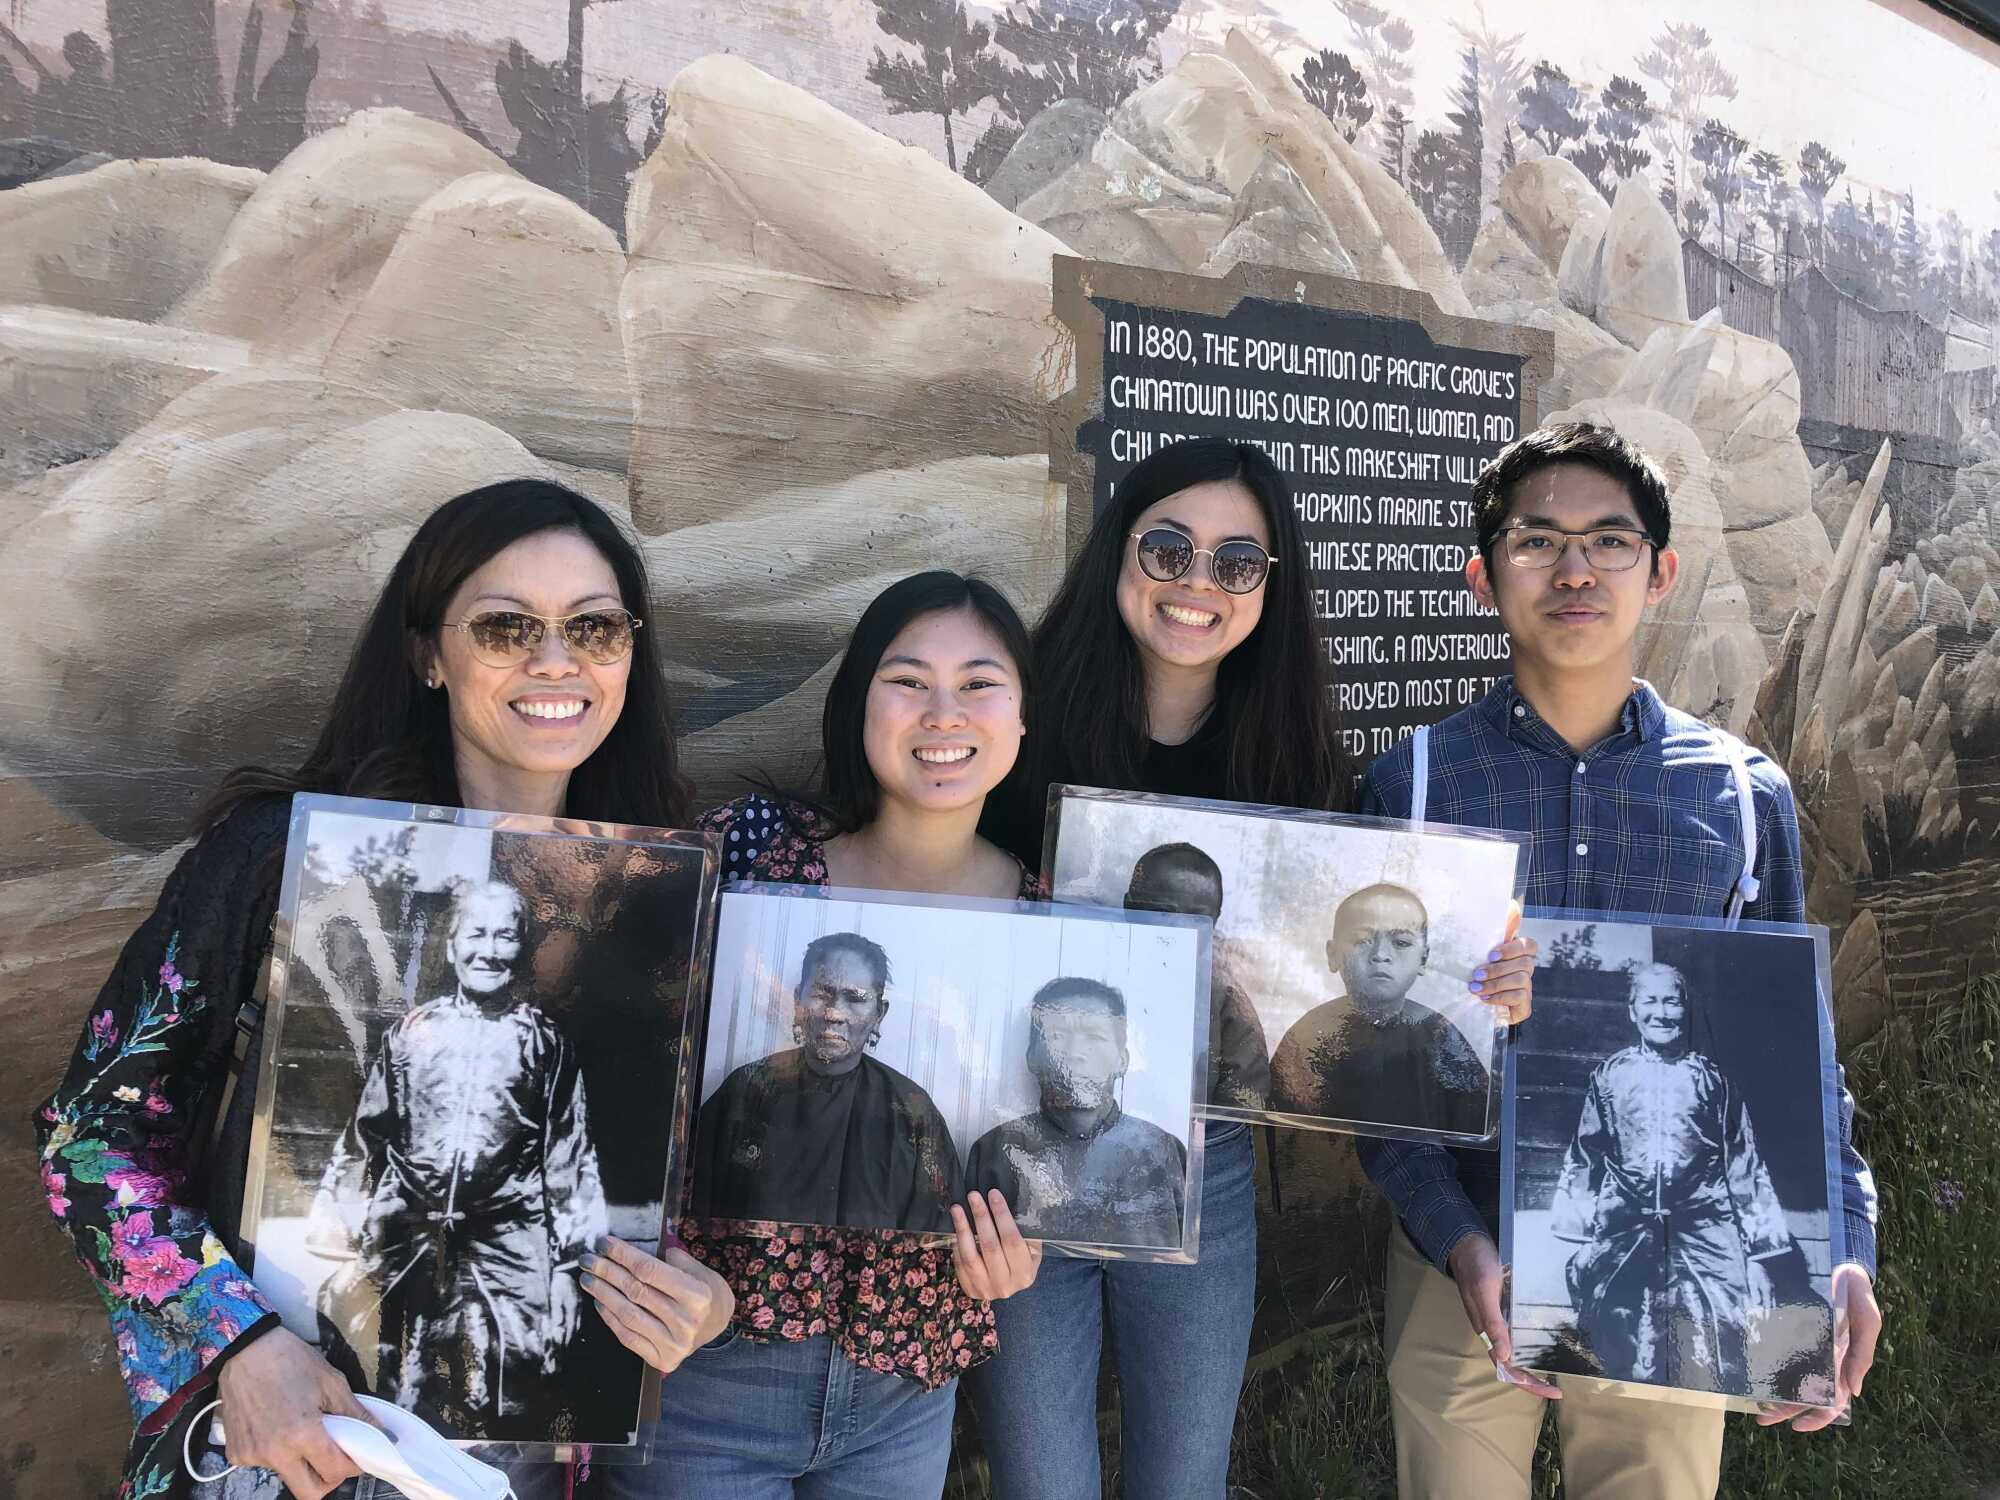 Four people standing in front of a mural on Pacific Grove's Chinatown, holding historic photos of people of Chinese descent.